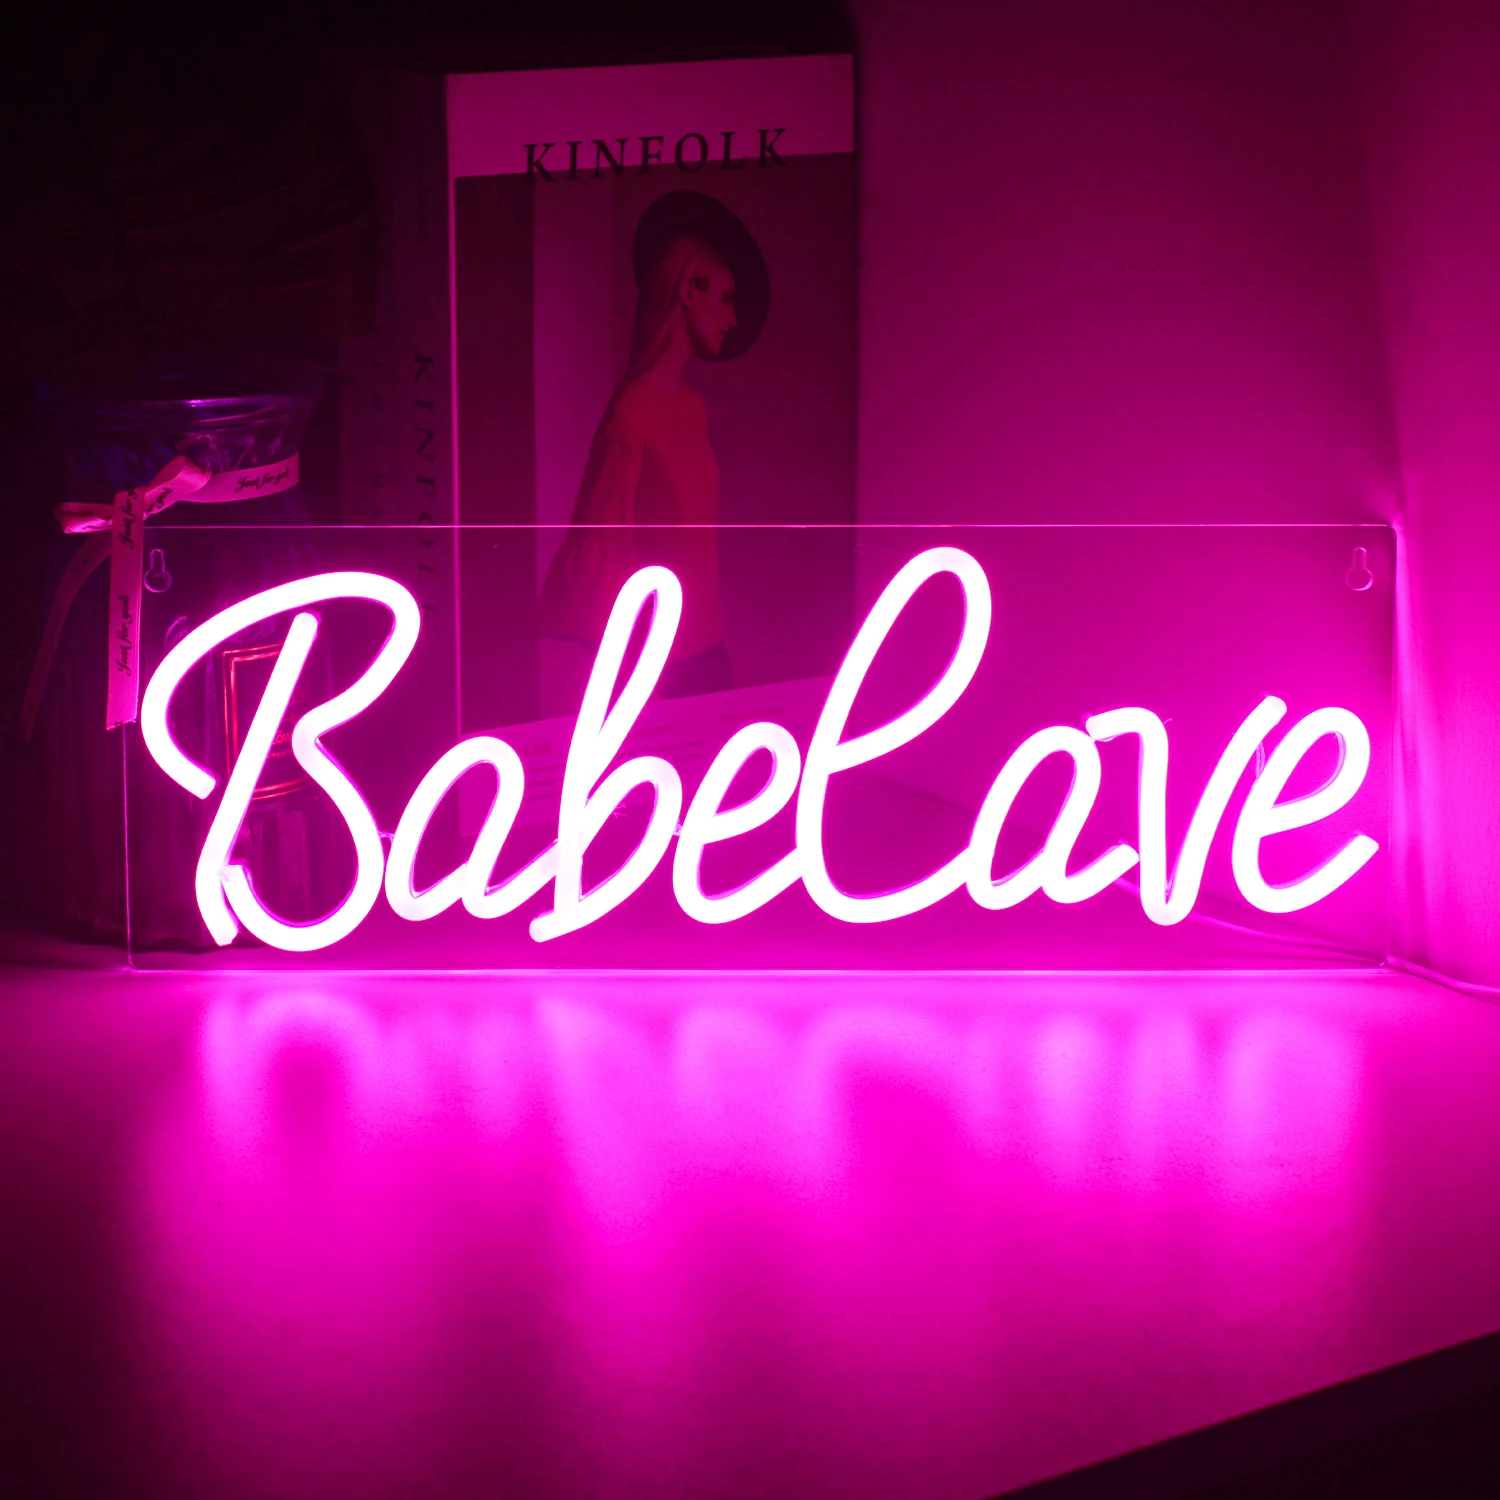 

Ineonlife Neon Sign Light for Party Club Babecave USB Powered Switch Room Wall Decor Atmosphere Lamp Gift